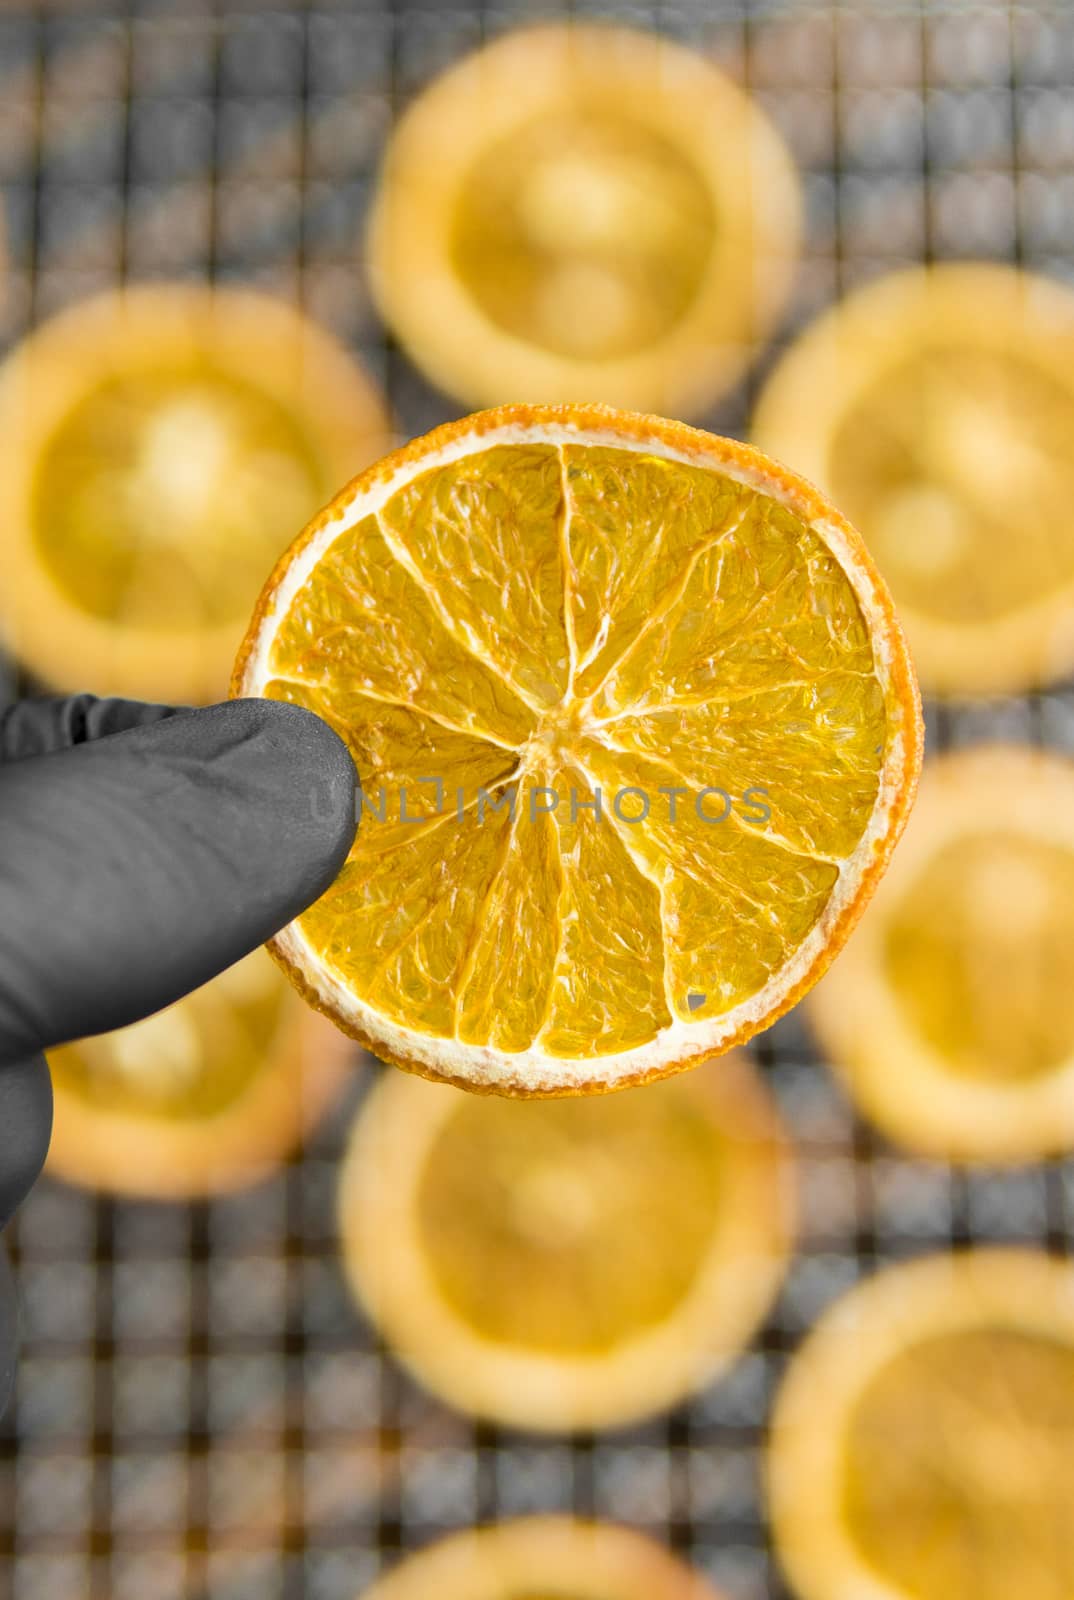 Candied orange slices on grid for drying. Dried fruits which can be used as a decoration to the meal or cocktails. Healthy vegetarian food rich on a vitamins and microelements